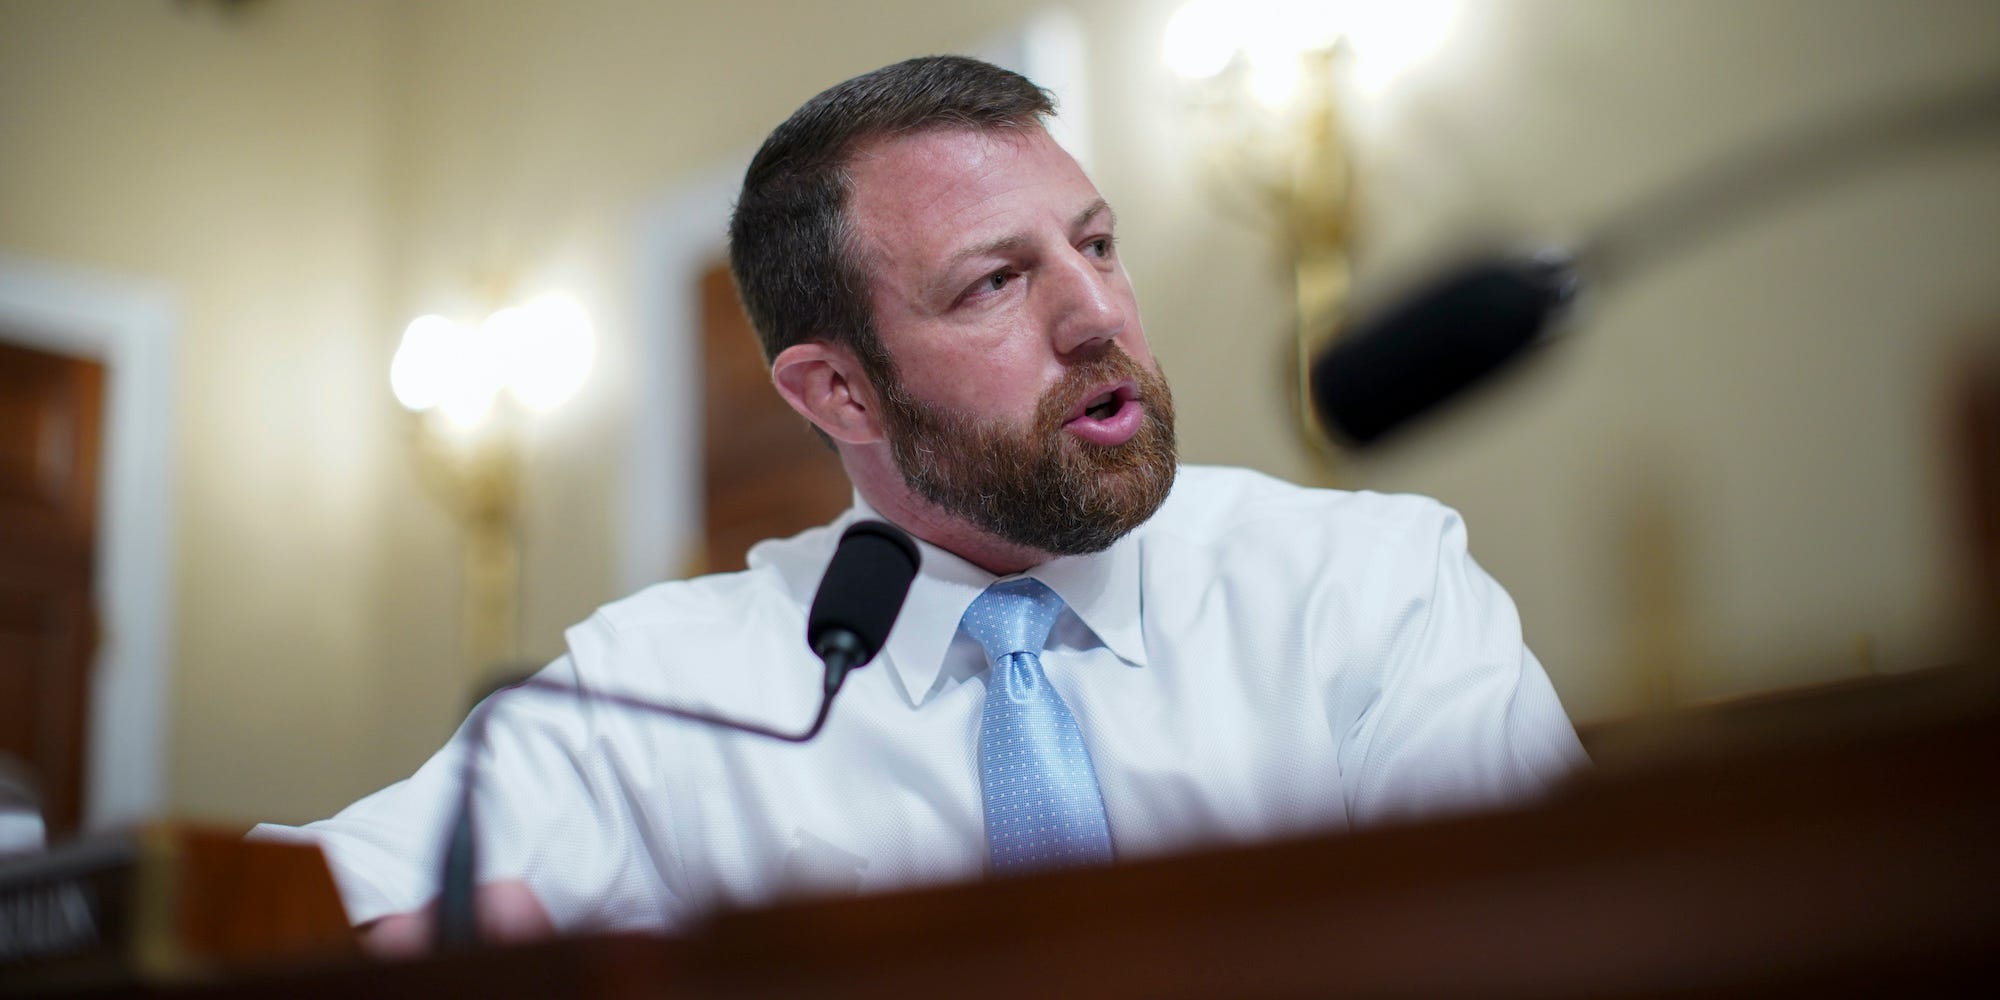 Rep. Markwayne Mullin, R-Okla., speaks during a House Intelligence Committee hearing on Capitol Hill in Washington, Thursday, April 15, 2021